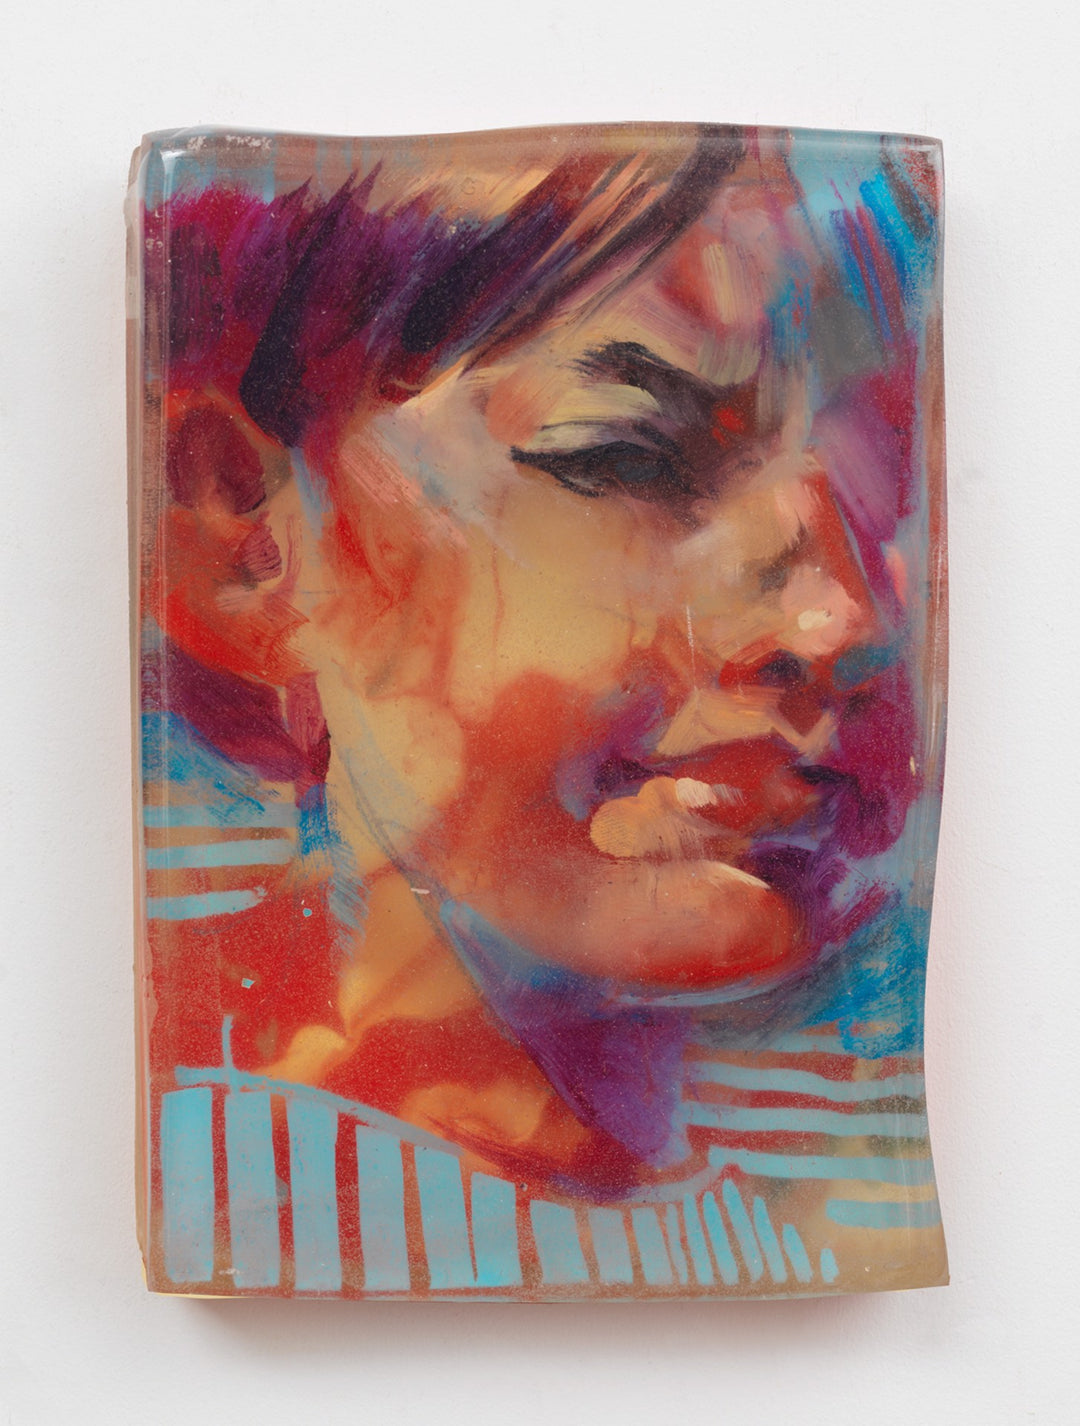 An oil painting of a woman's face on a piece of glass, capturing the essence of Marc Scheff - "Nostalgia" by Marc Scheff.